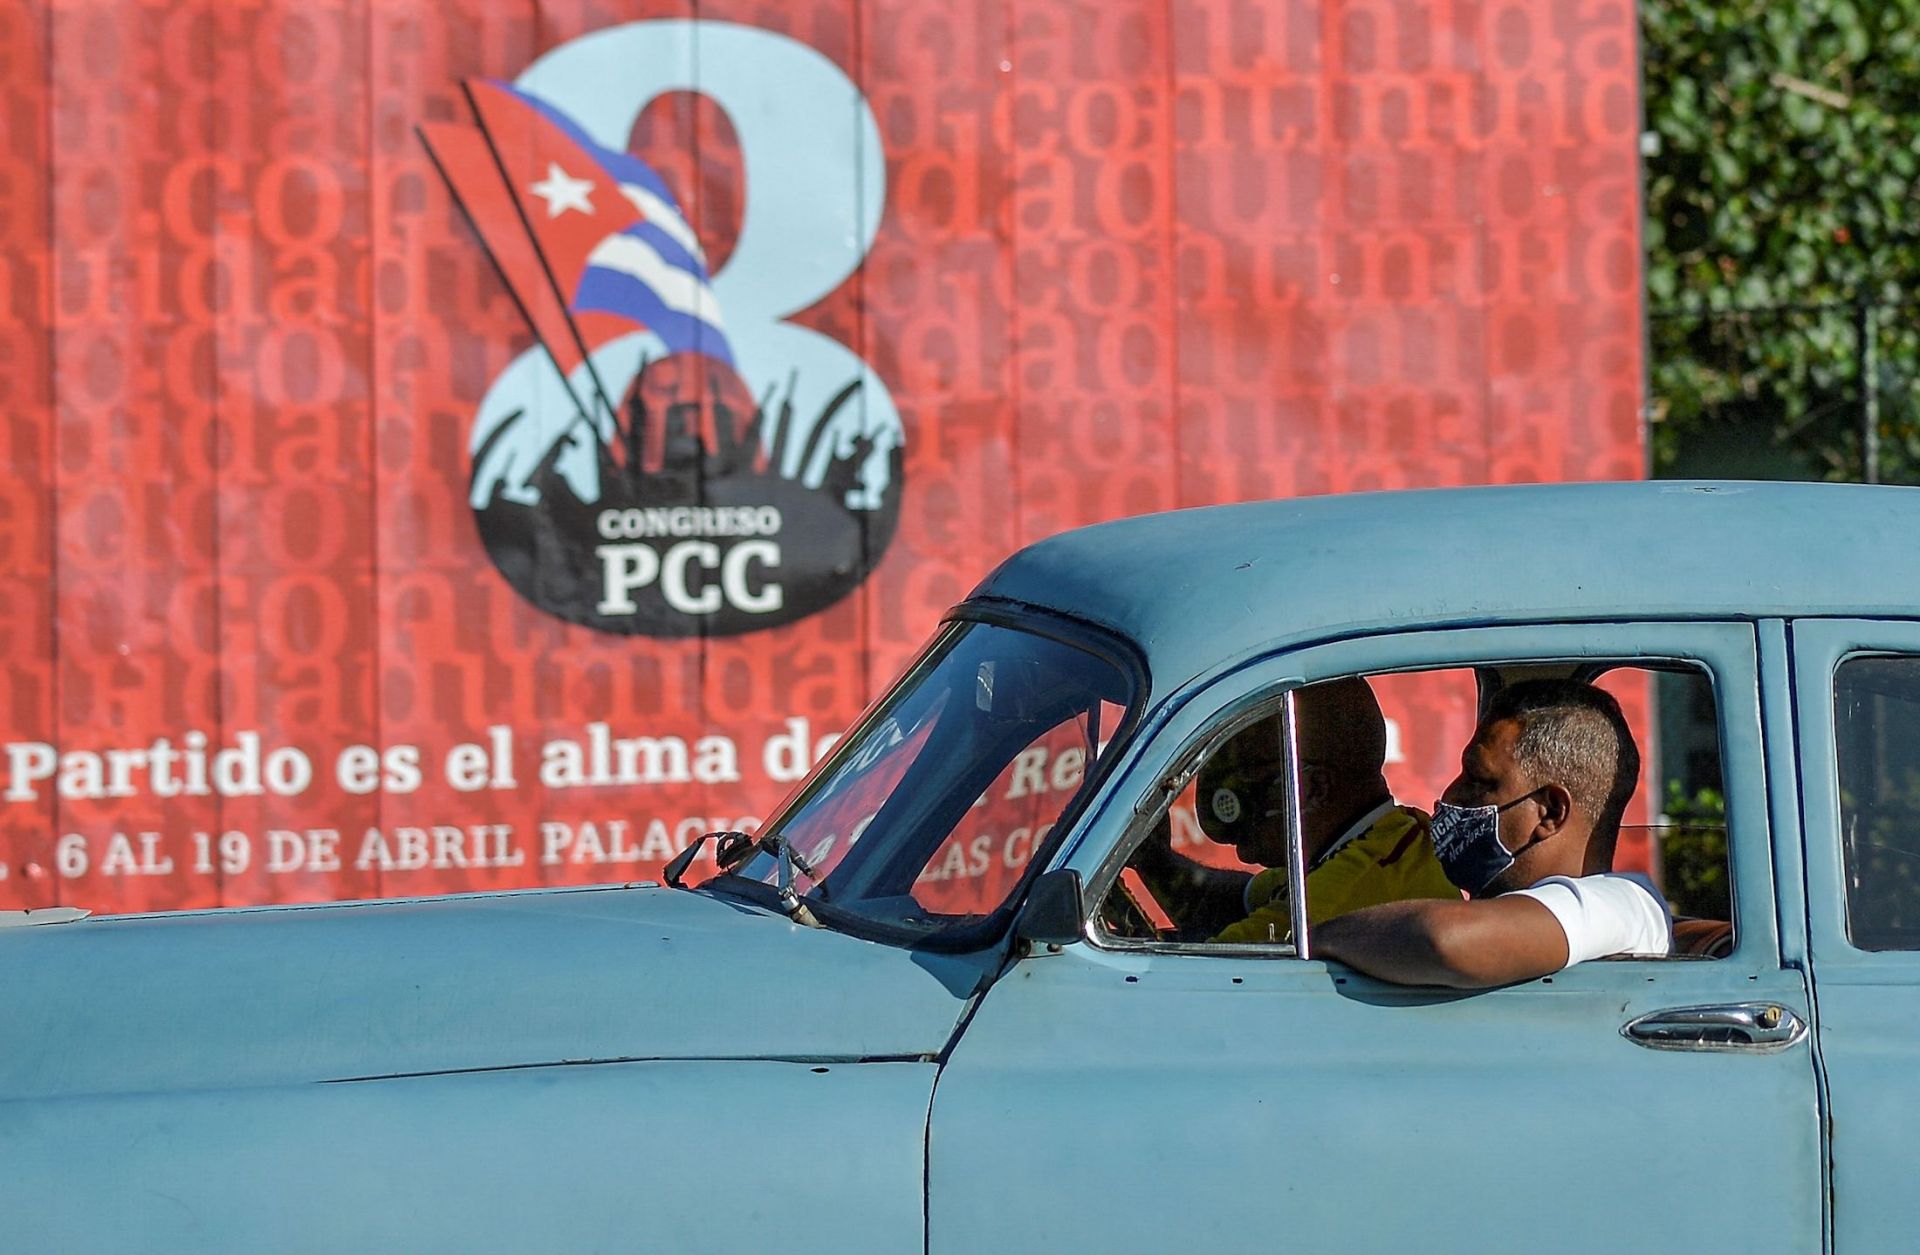 A motorist passes a sign for the 8th Congress of the Cuban Communist Party on April 6, 2021, in Havana.